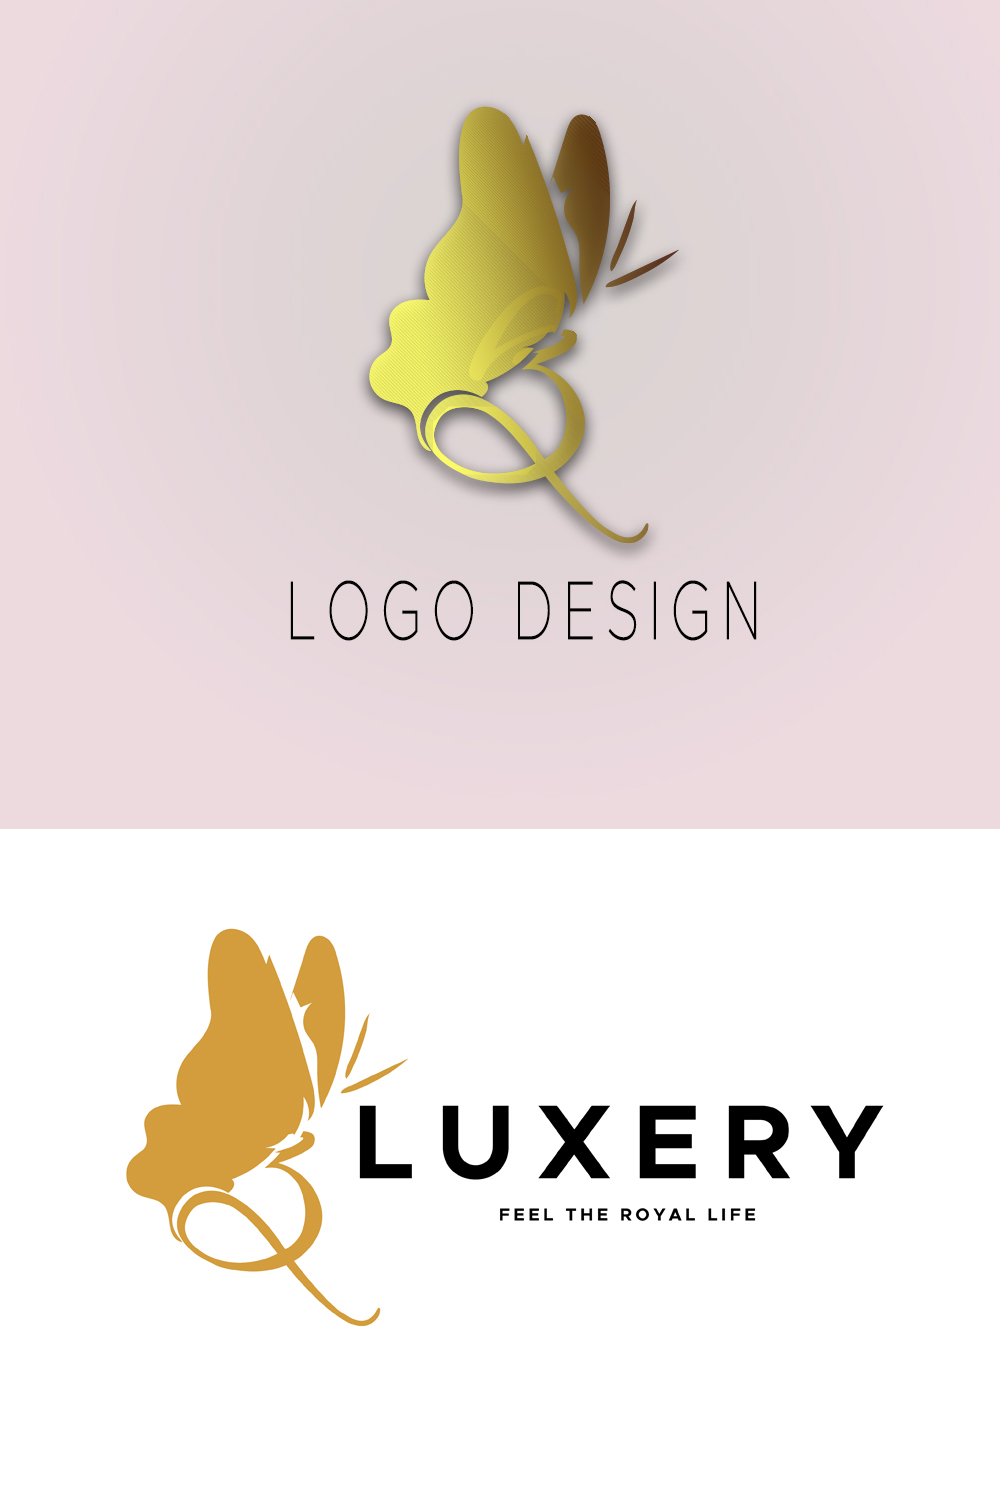 ROYAL BUTTERFLY LOGO DESIGN LUXERY LOGO vector pinterest preview image.